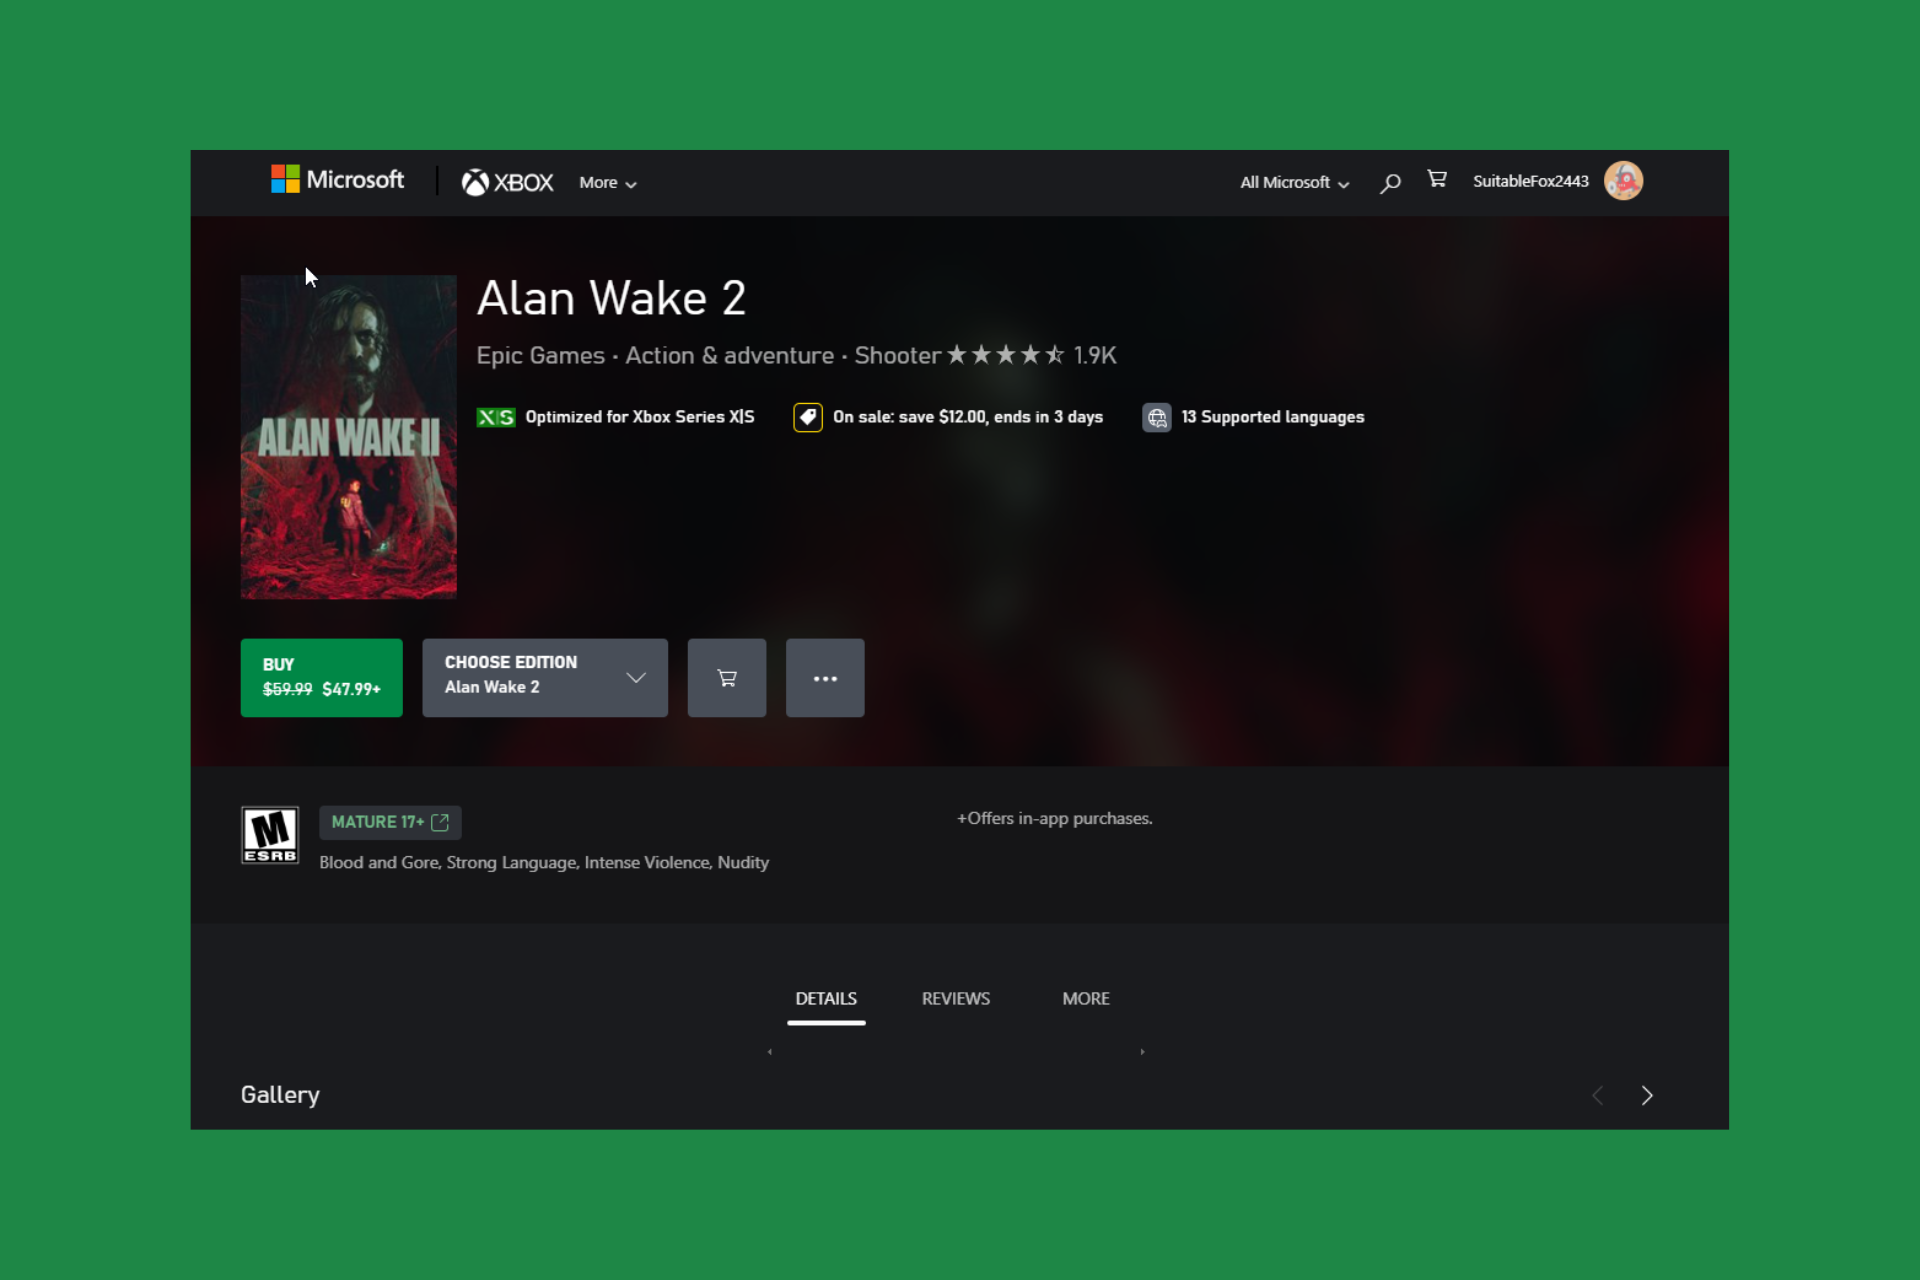 If Alan Wake 2 is on your wishlist, the Xbox Spring Sale is the perfect time to get it